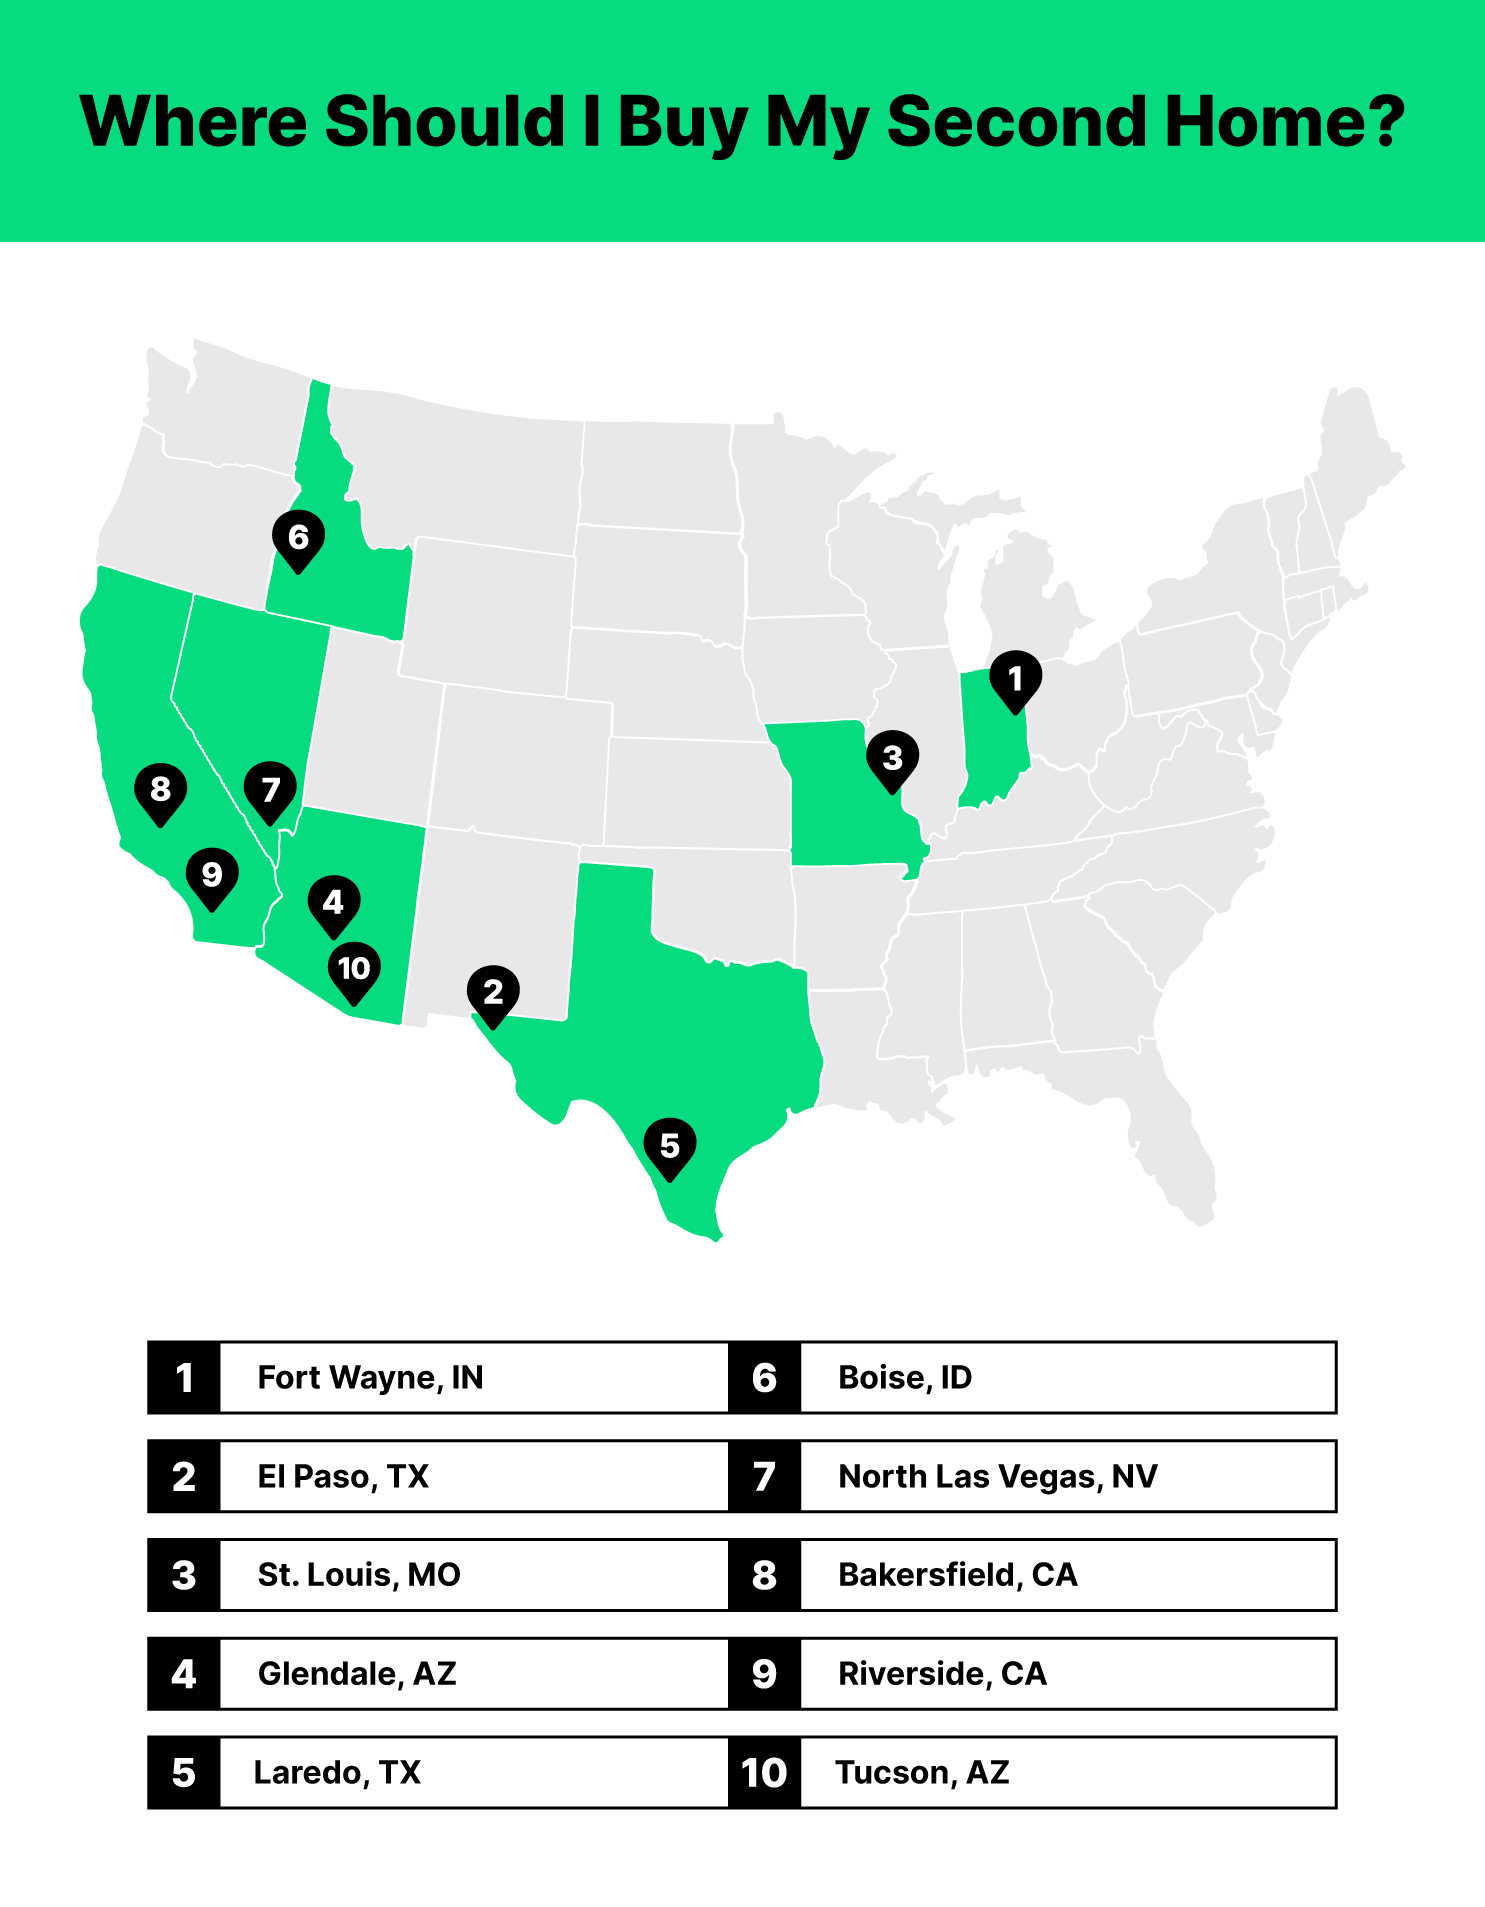 Top 10 cities to buy a second home, with their locations marked on a map of the United States